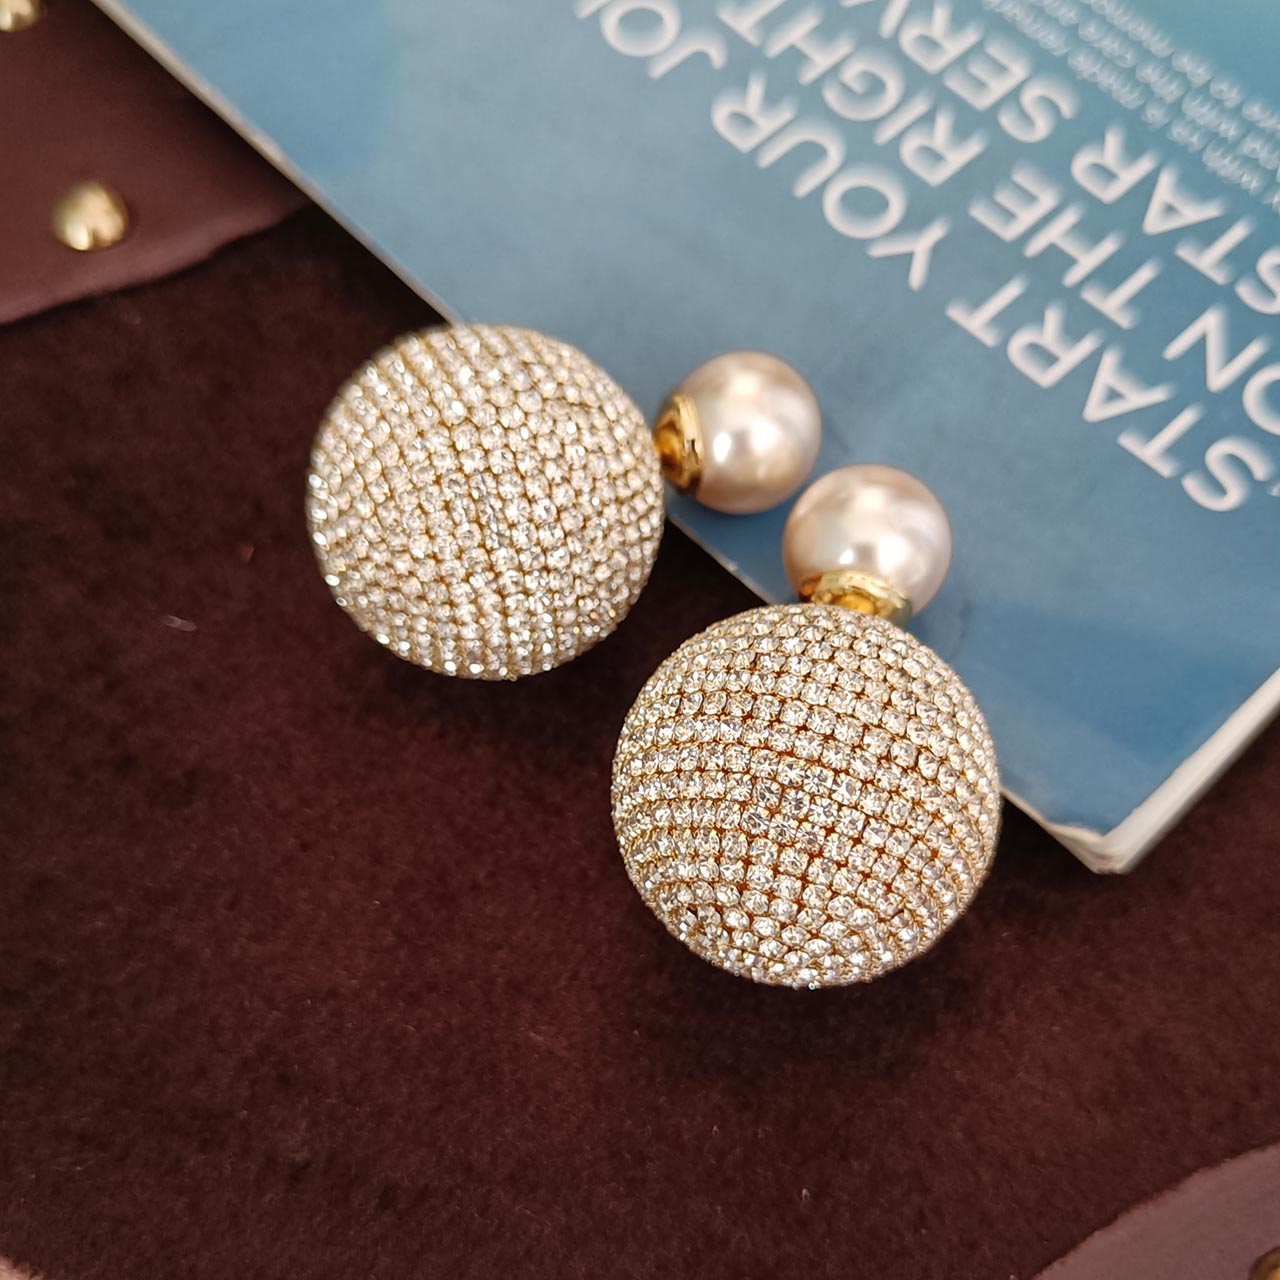 SWAROVSKI ICONIC SWAN STUD EARRINGS WHITE CRYSTAL  CRYSTAL PEARL RHODIUM  PLATED FRONT AND BACK STYLE EARRINGS  Jewelry from Adams Jewellers  Limited UK